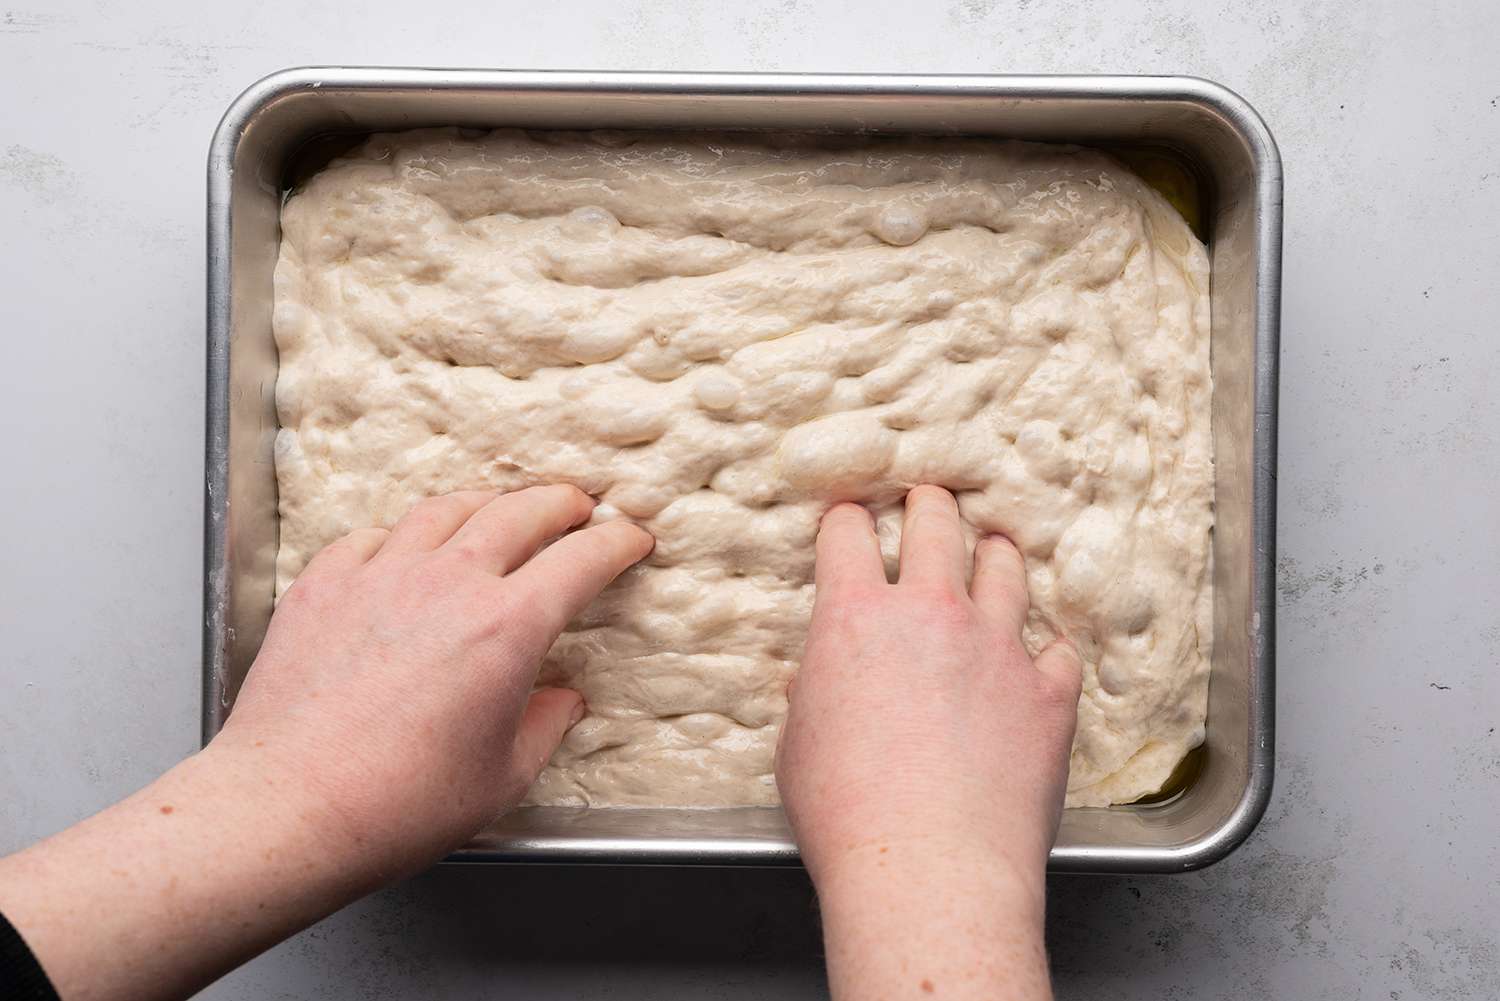 Make dimples all over the dough in the baking dish with hands